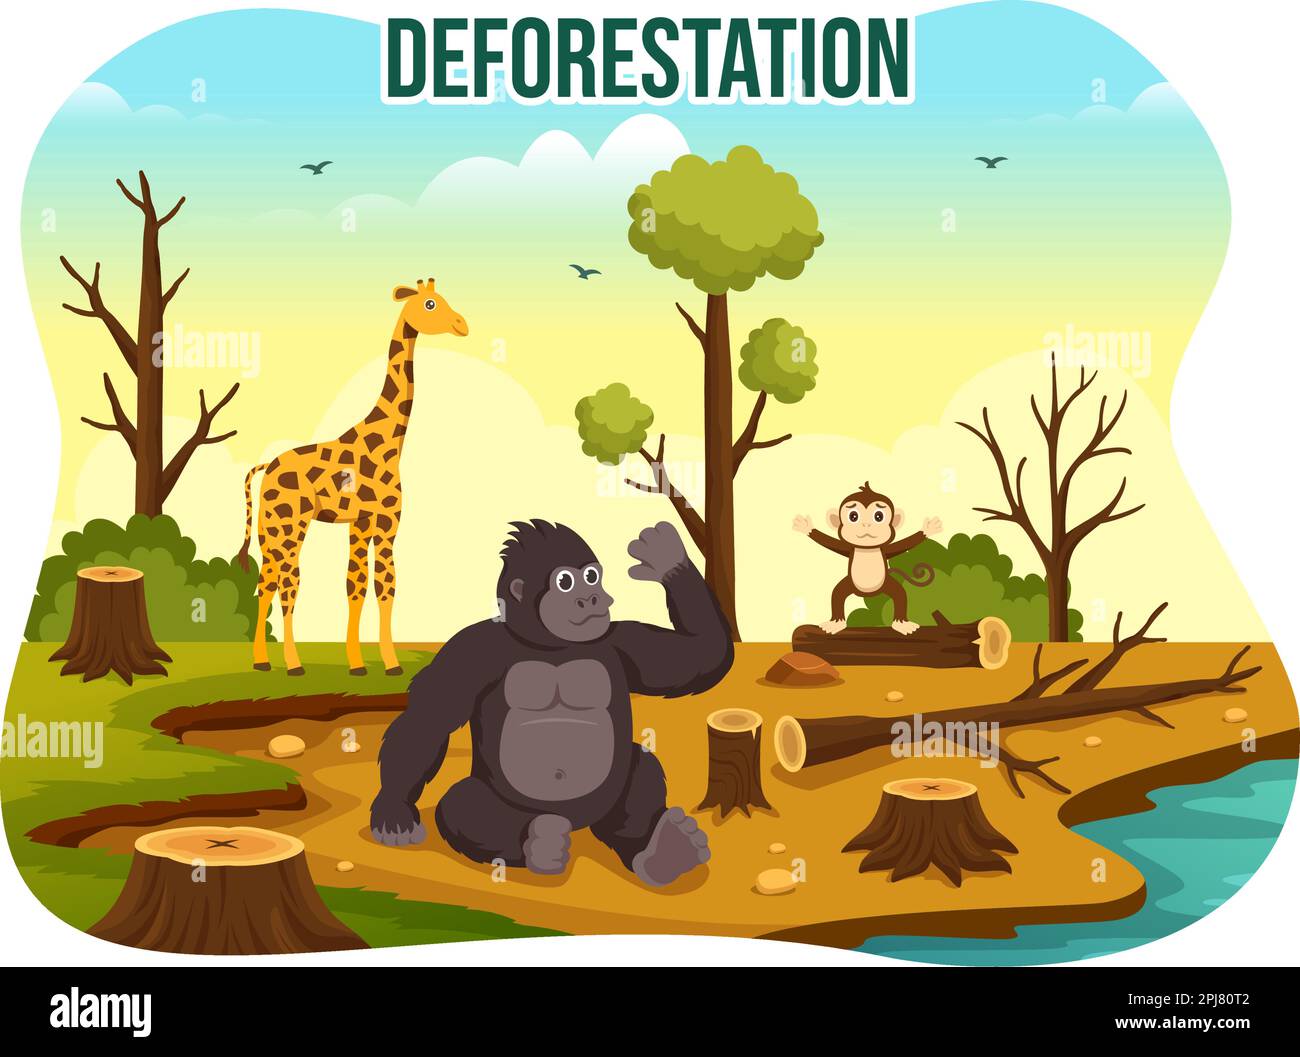 Deforestation Illustration with Tree in the Felled Forest and Burning Into Pollution Causing the Extinction of Animals in Cartoon Hand Drawn Templates Stock Vector